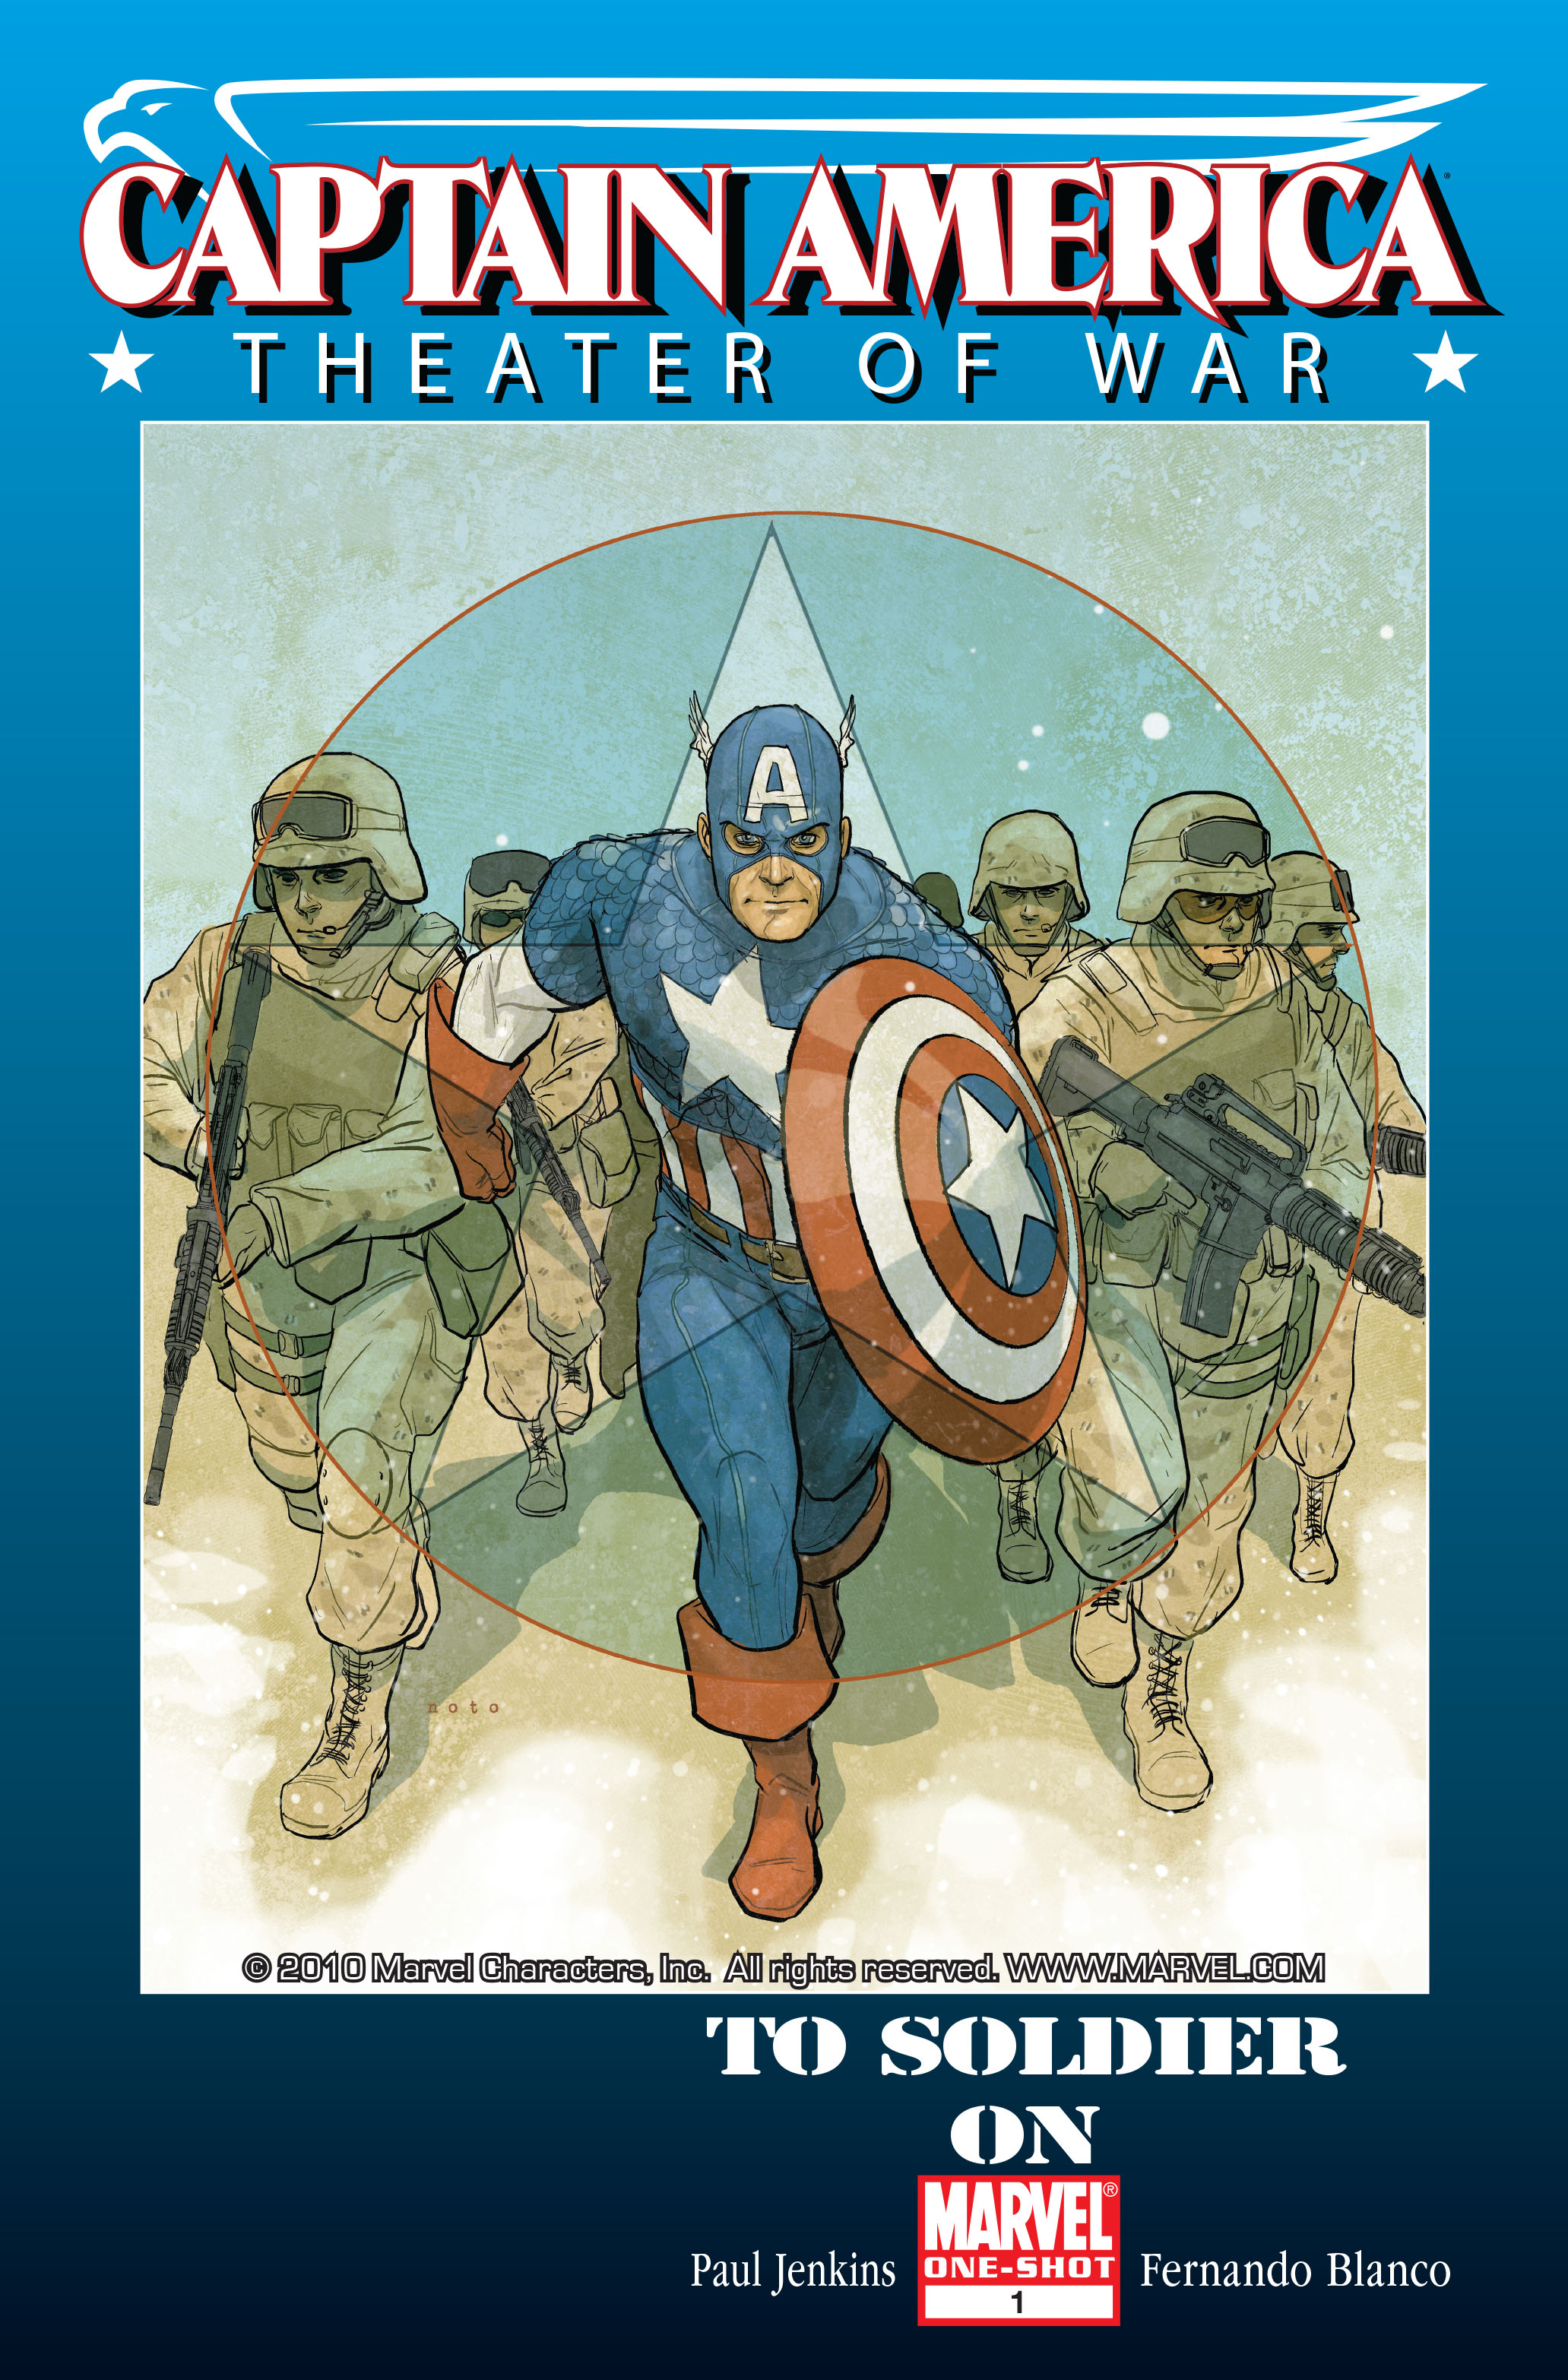 Read online Captain America Theater of War: To Soldier On comic -  Issue # Full - 1